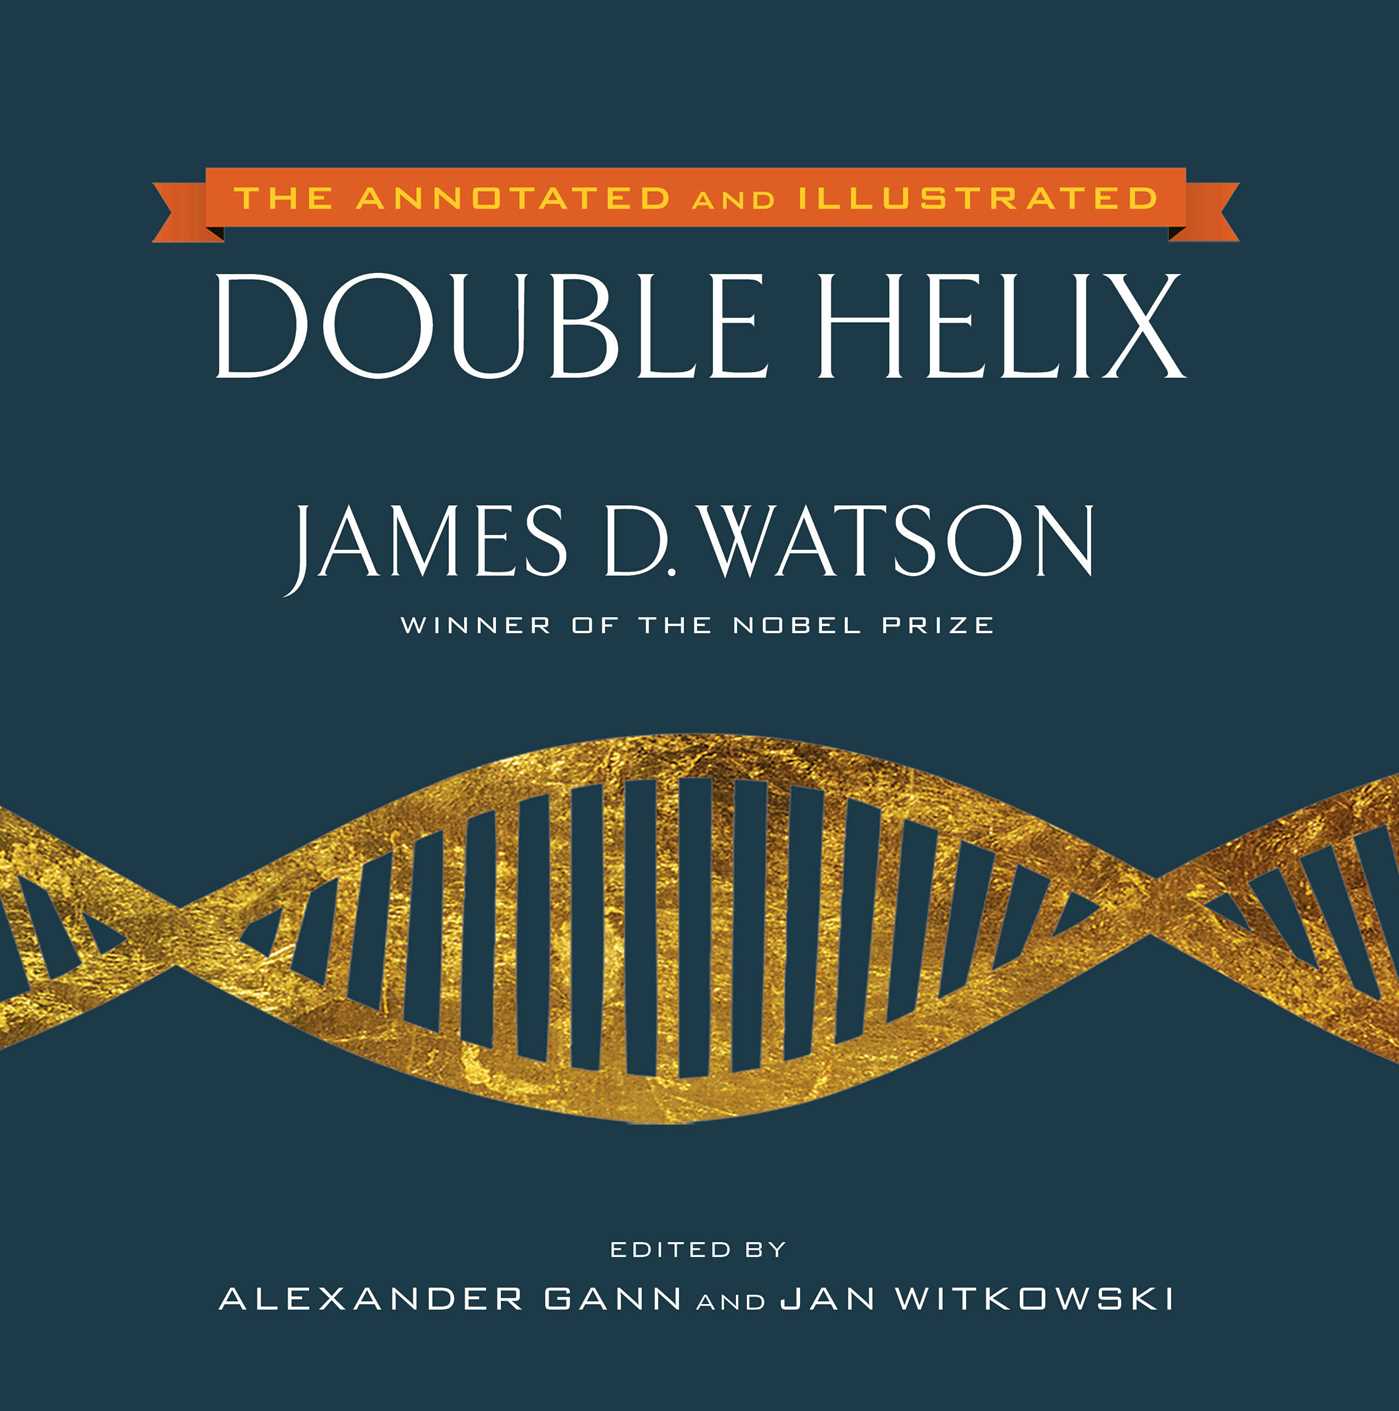 The Annotated and Illustrated Double Helix - James D. Watson, Alexander Gann, Jan Witkowski